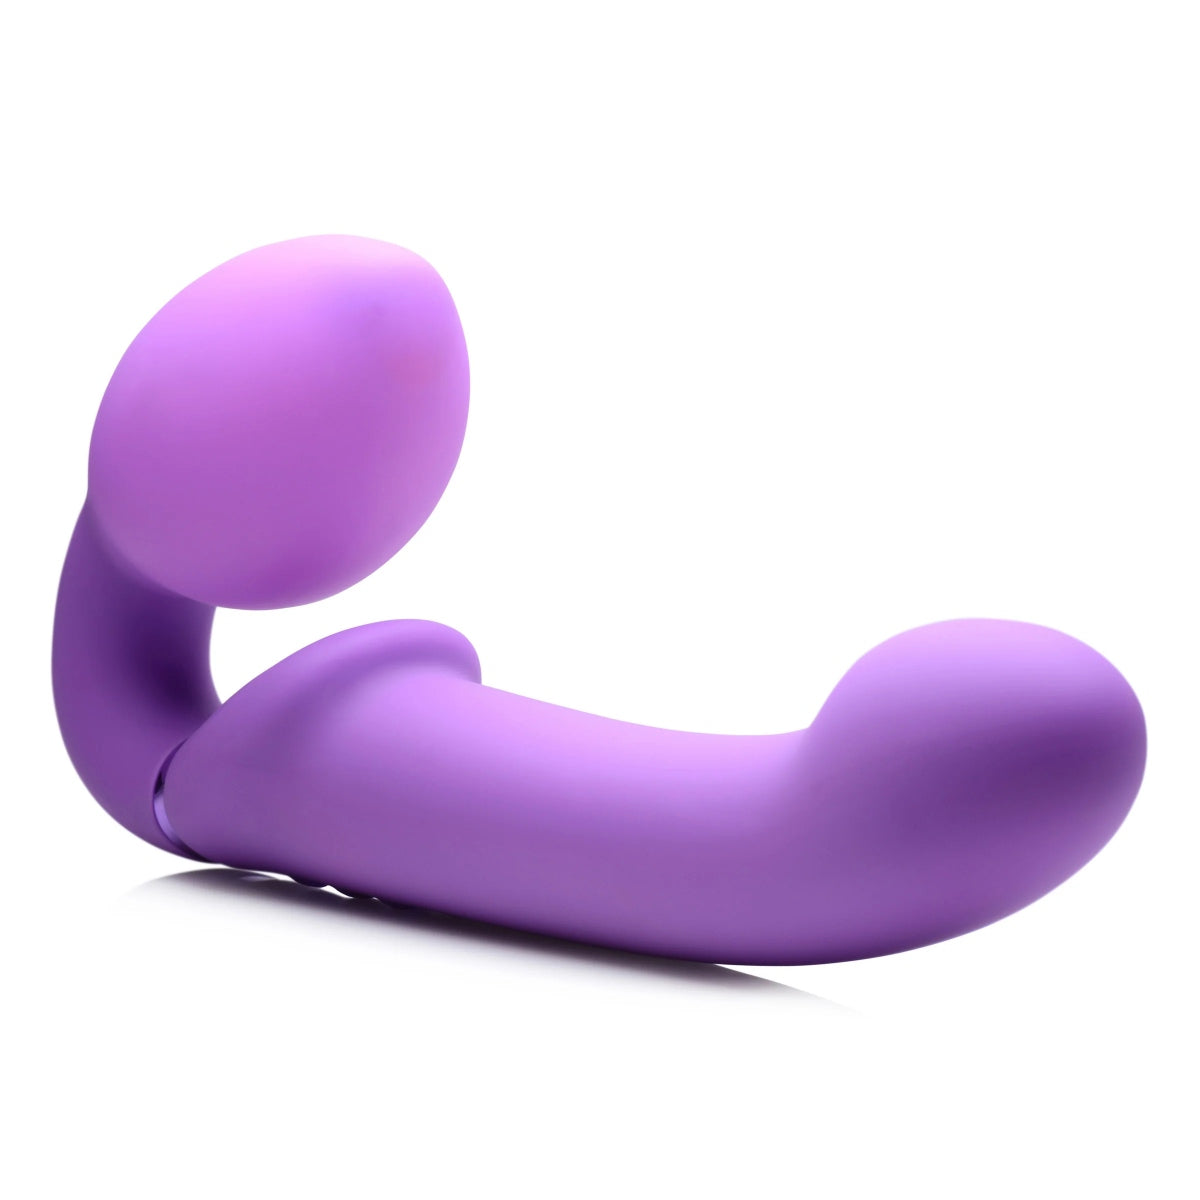 Strap U 10X Ergo Fit G-Pulse Inflatable & Vibrating Strapless Strap-On Purple